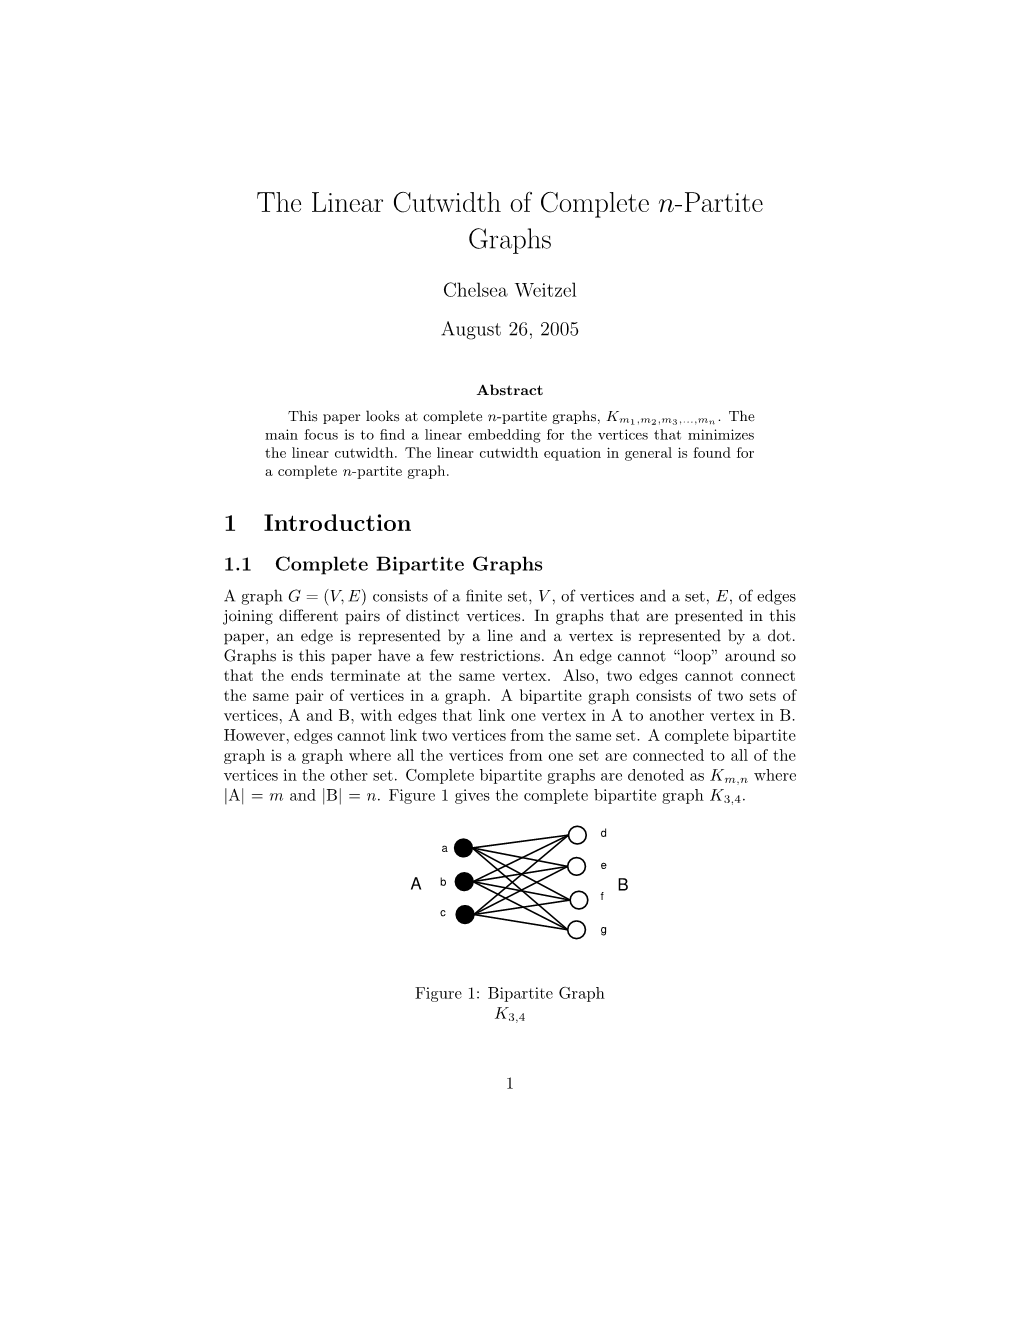 The Linear Cutwidth of Complete N-Partite Graphs